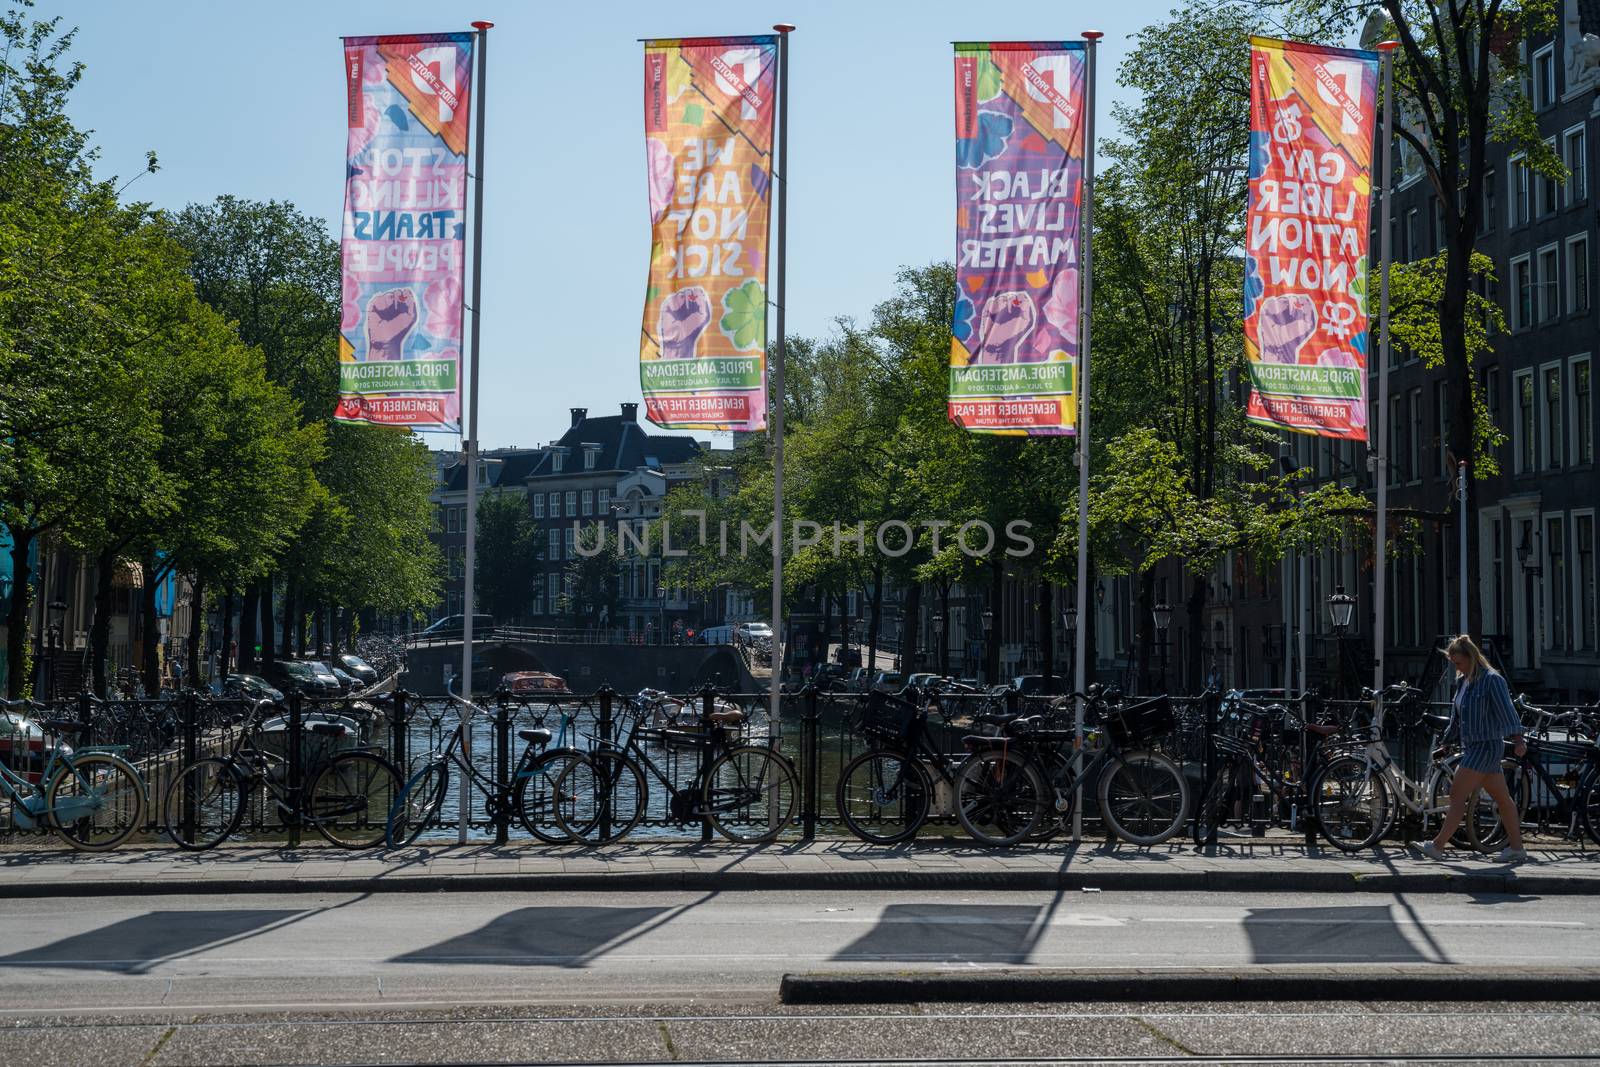 Protest Flags Fly in Amsterdam by jfbenning